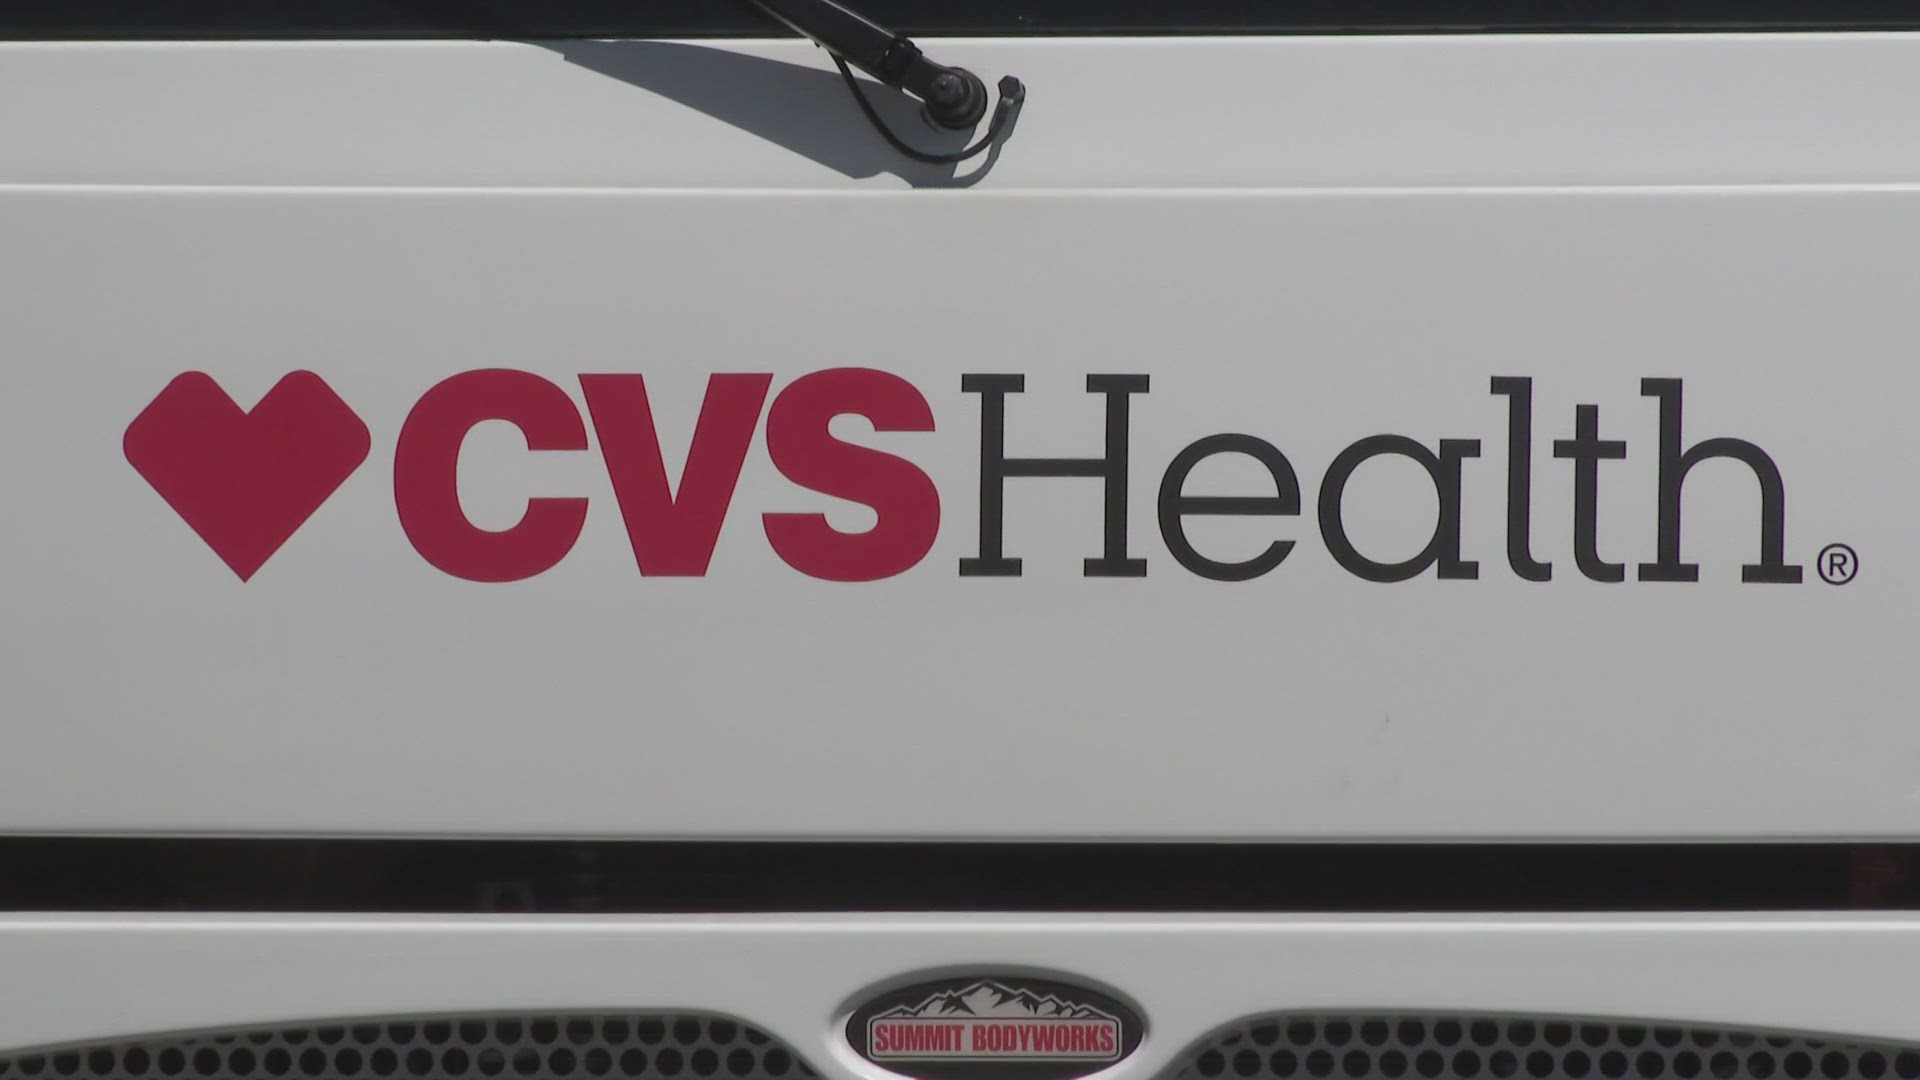 In addition to the new grants, CVS will also be offering free health screenings.